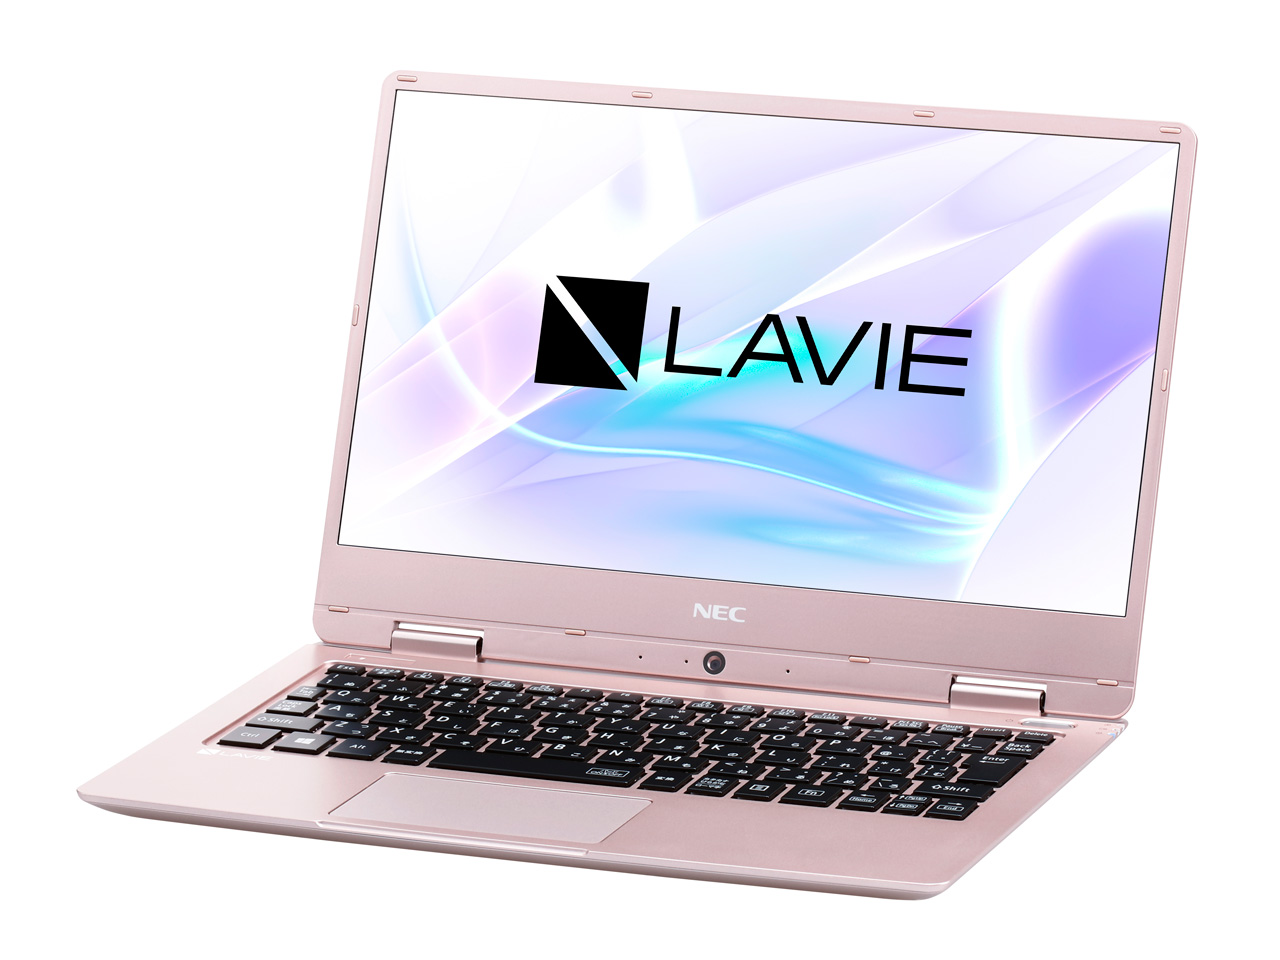 LAVIE Note Mobile NM550/KAG PC-NM550KAG [メタリックピンク]